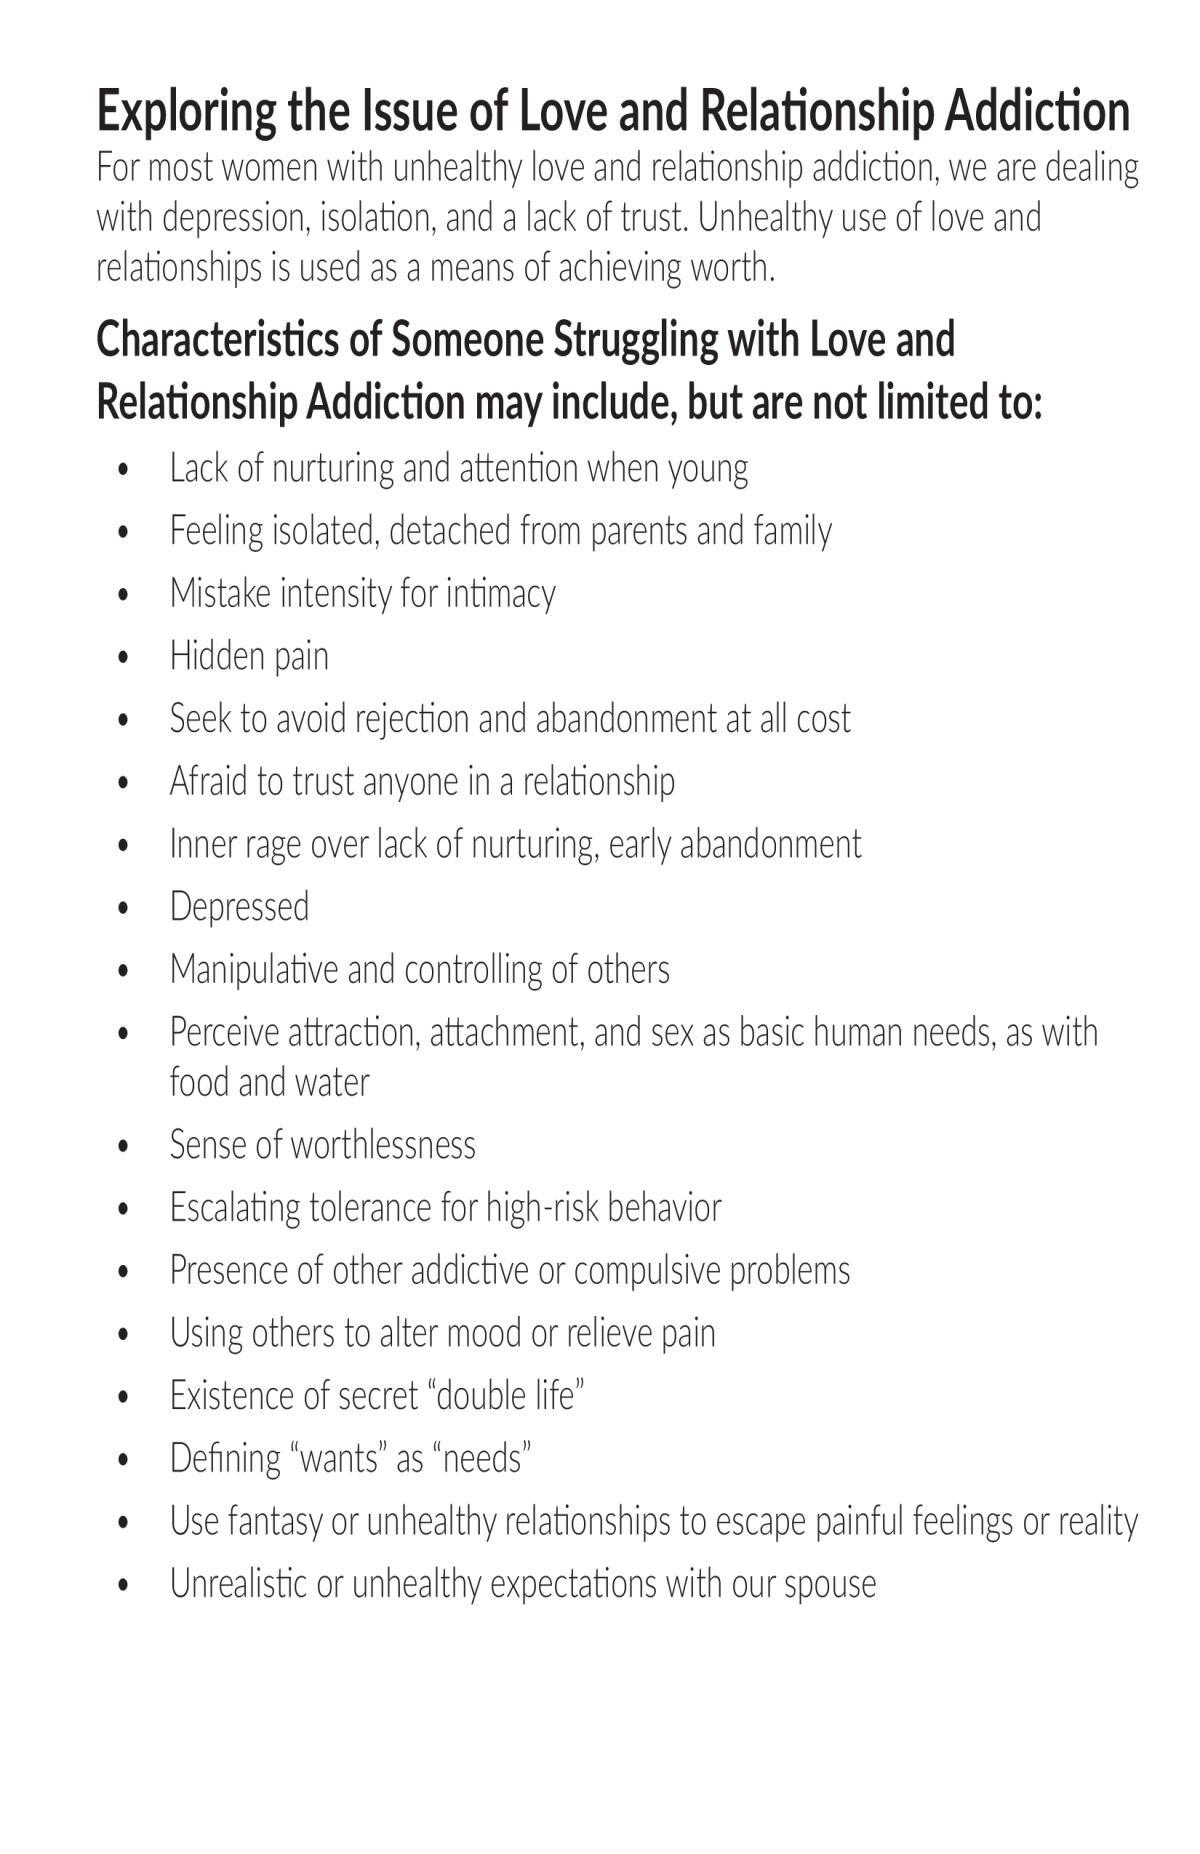 Love and Relationship Addiction